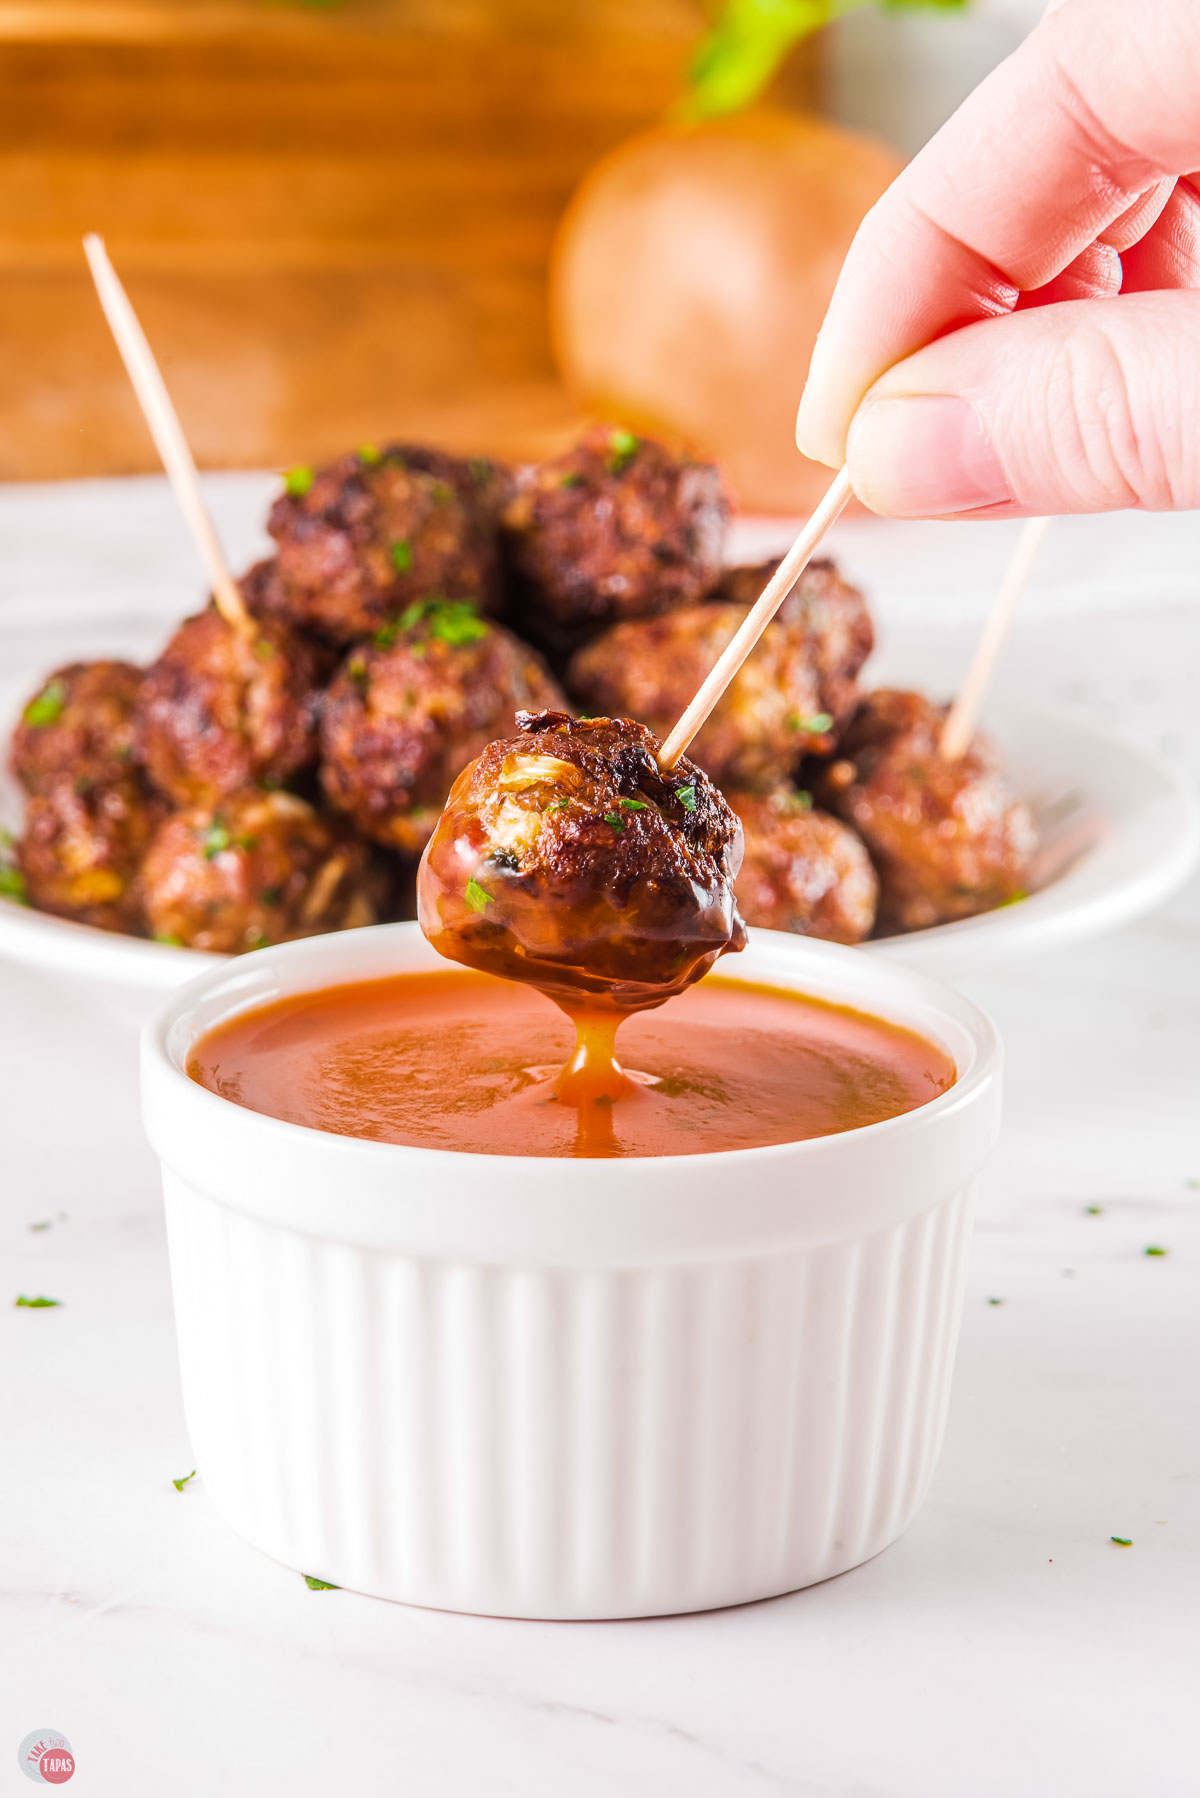 best meatballs come on a toothpick with a dipping sauce